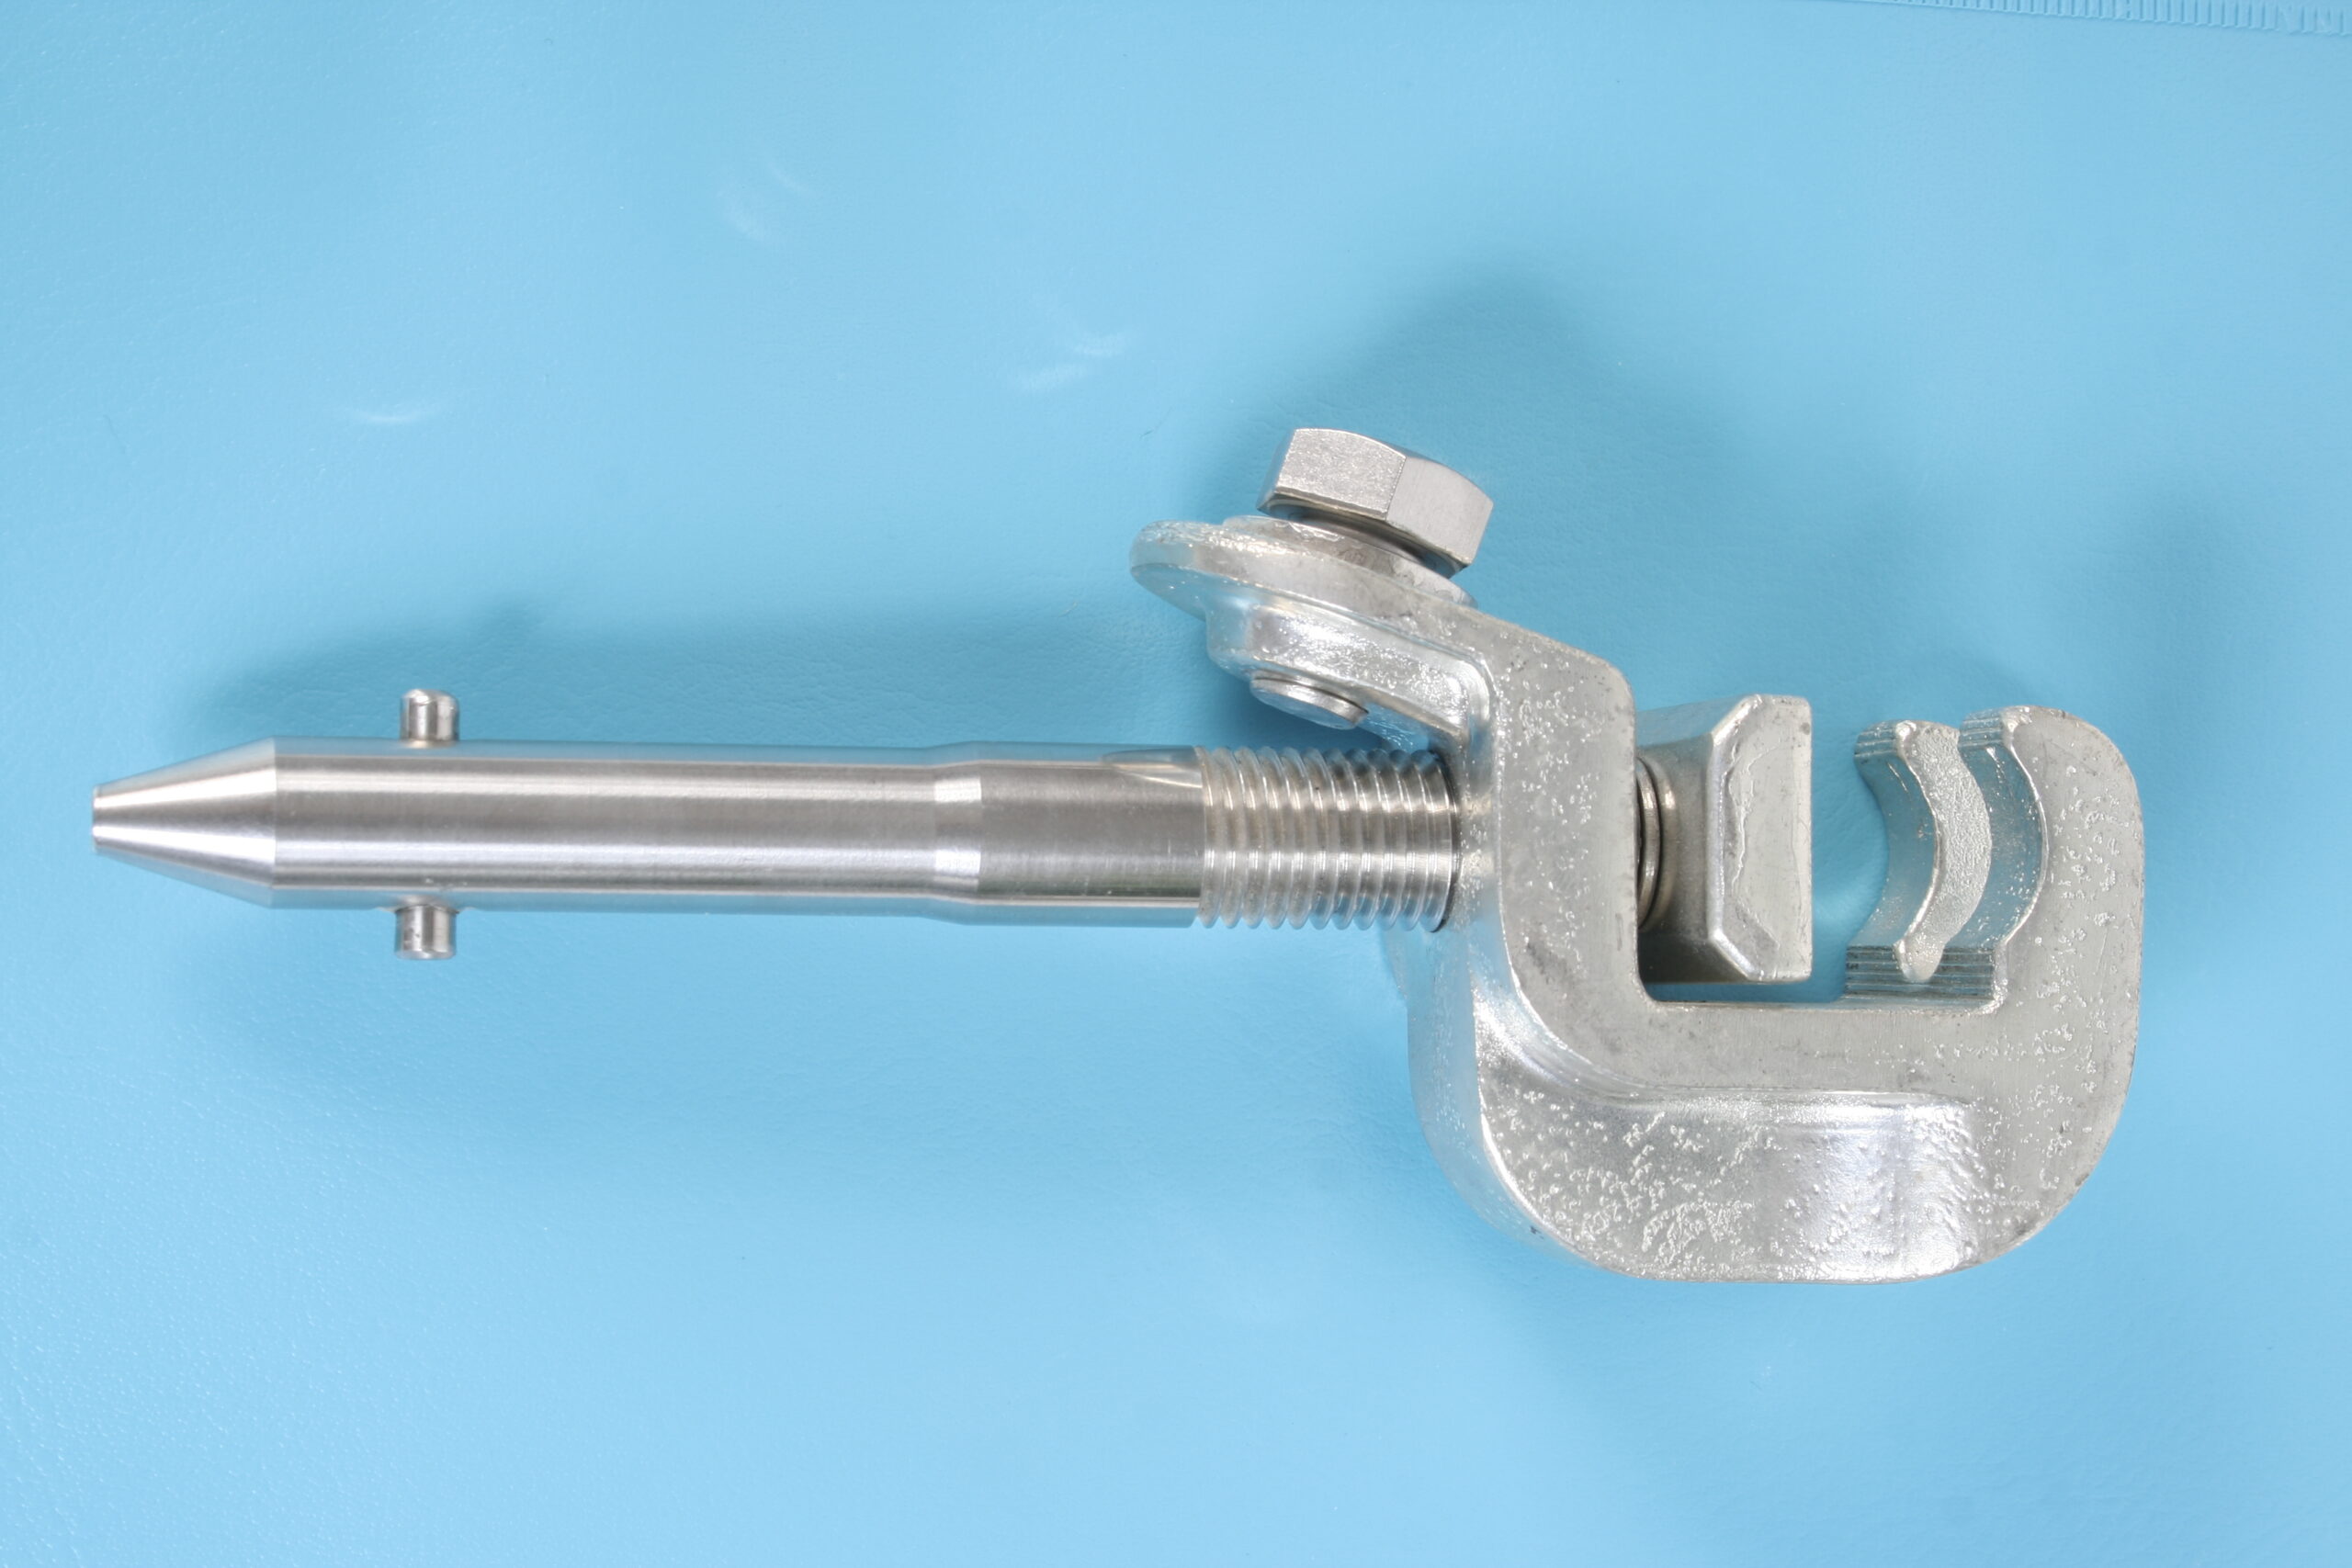 Universal Conductor Screw Clamp With A Plastic Handle